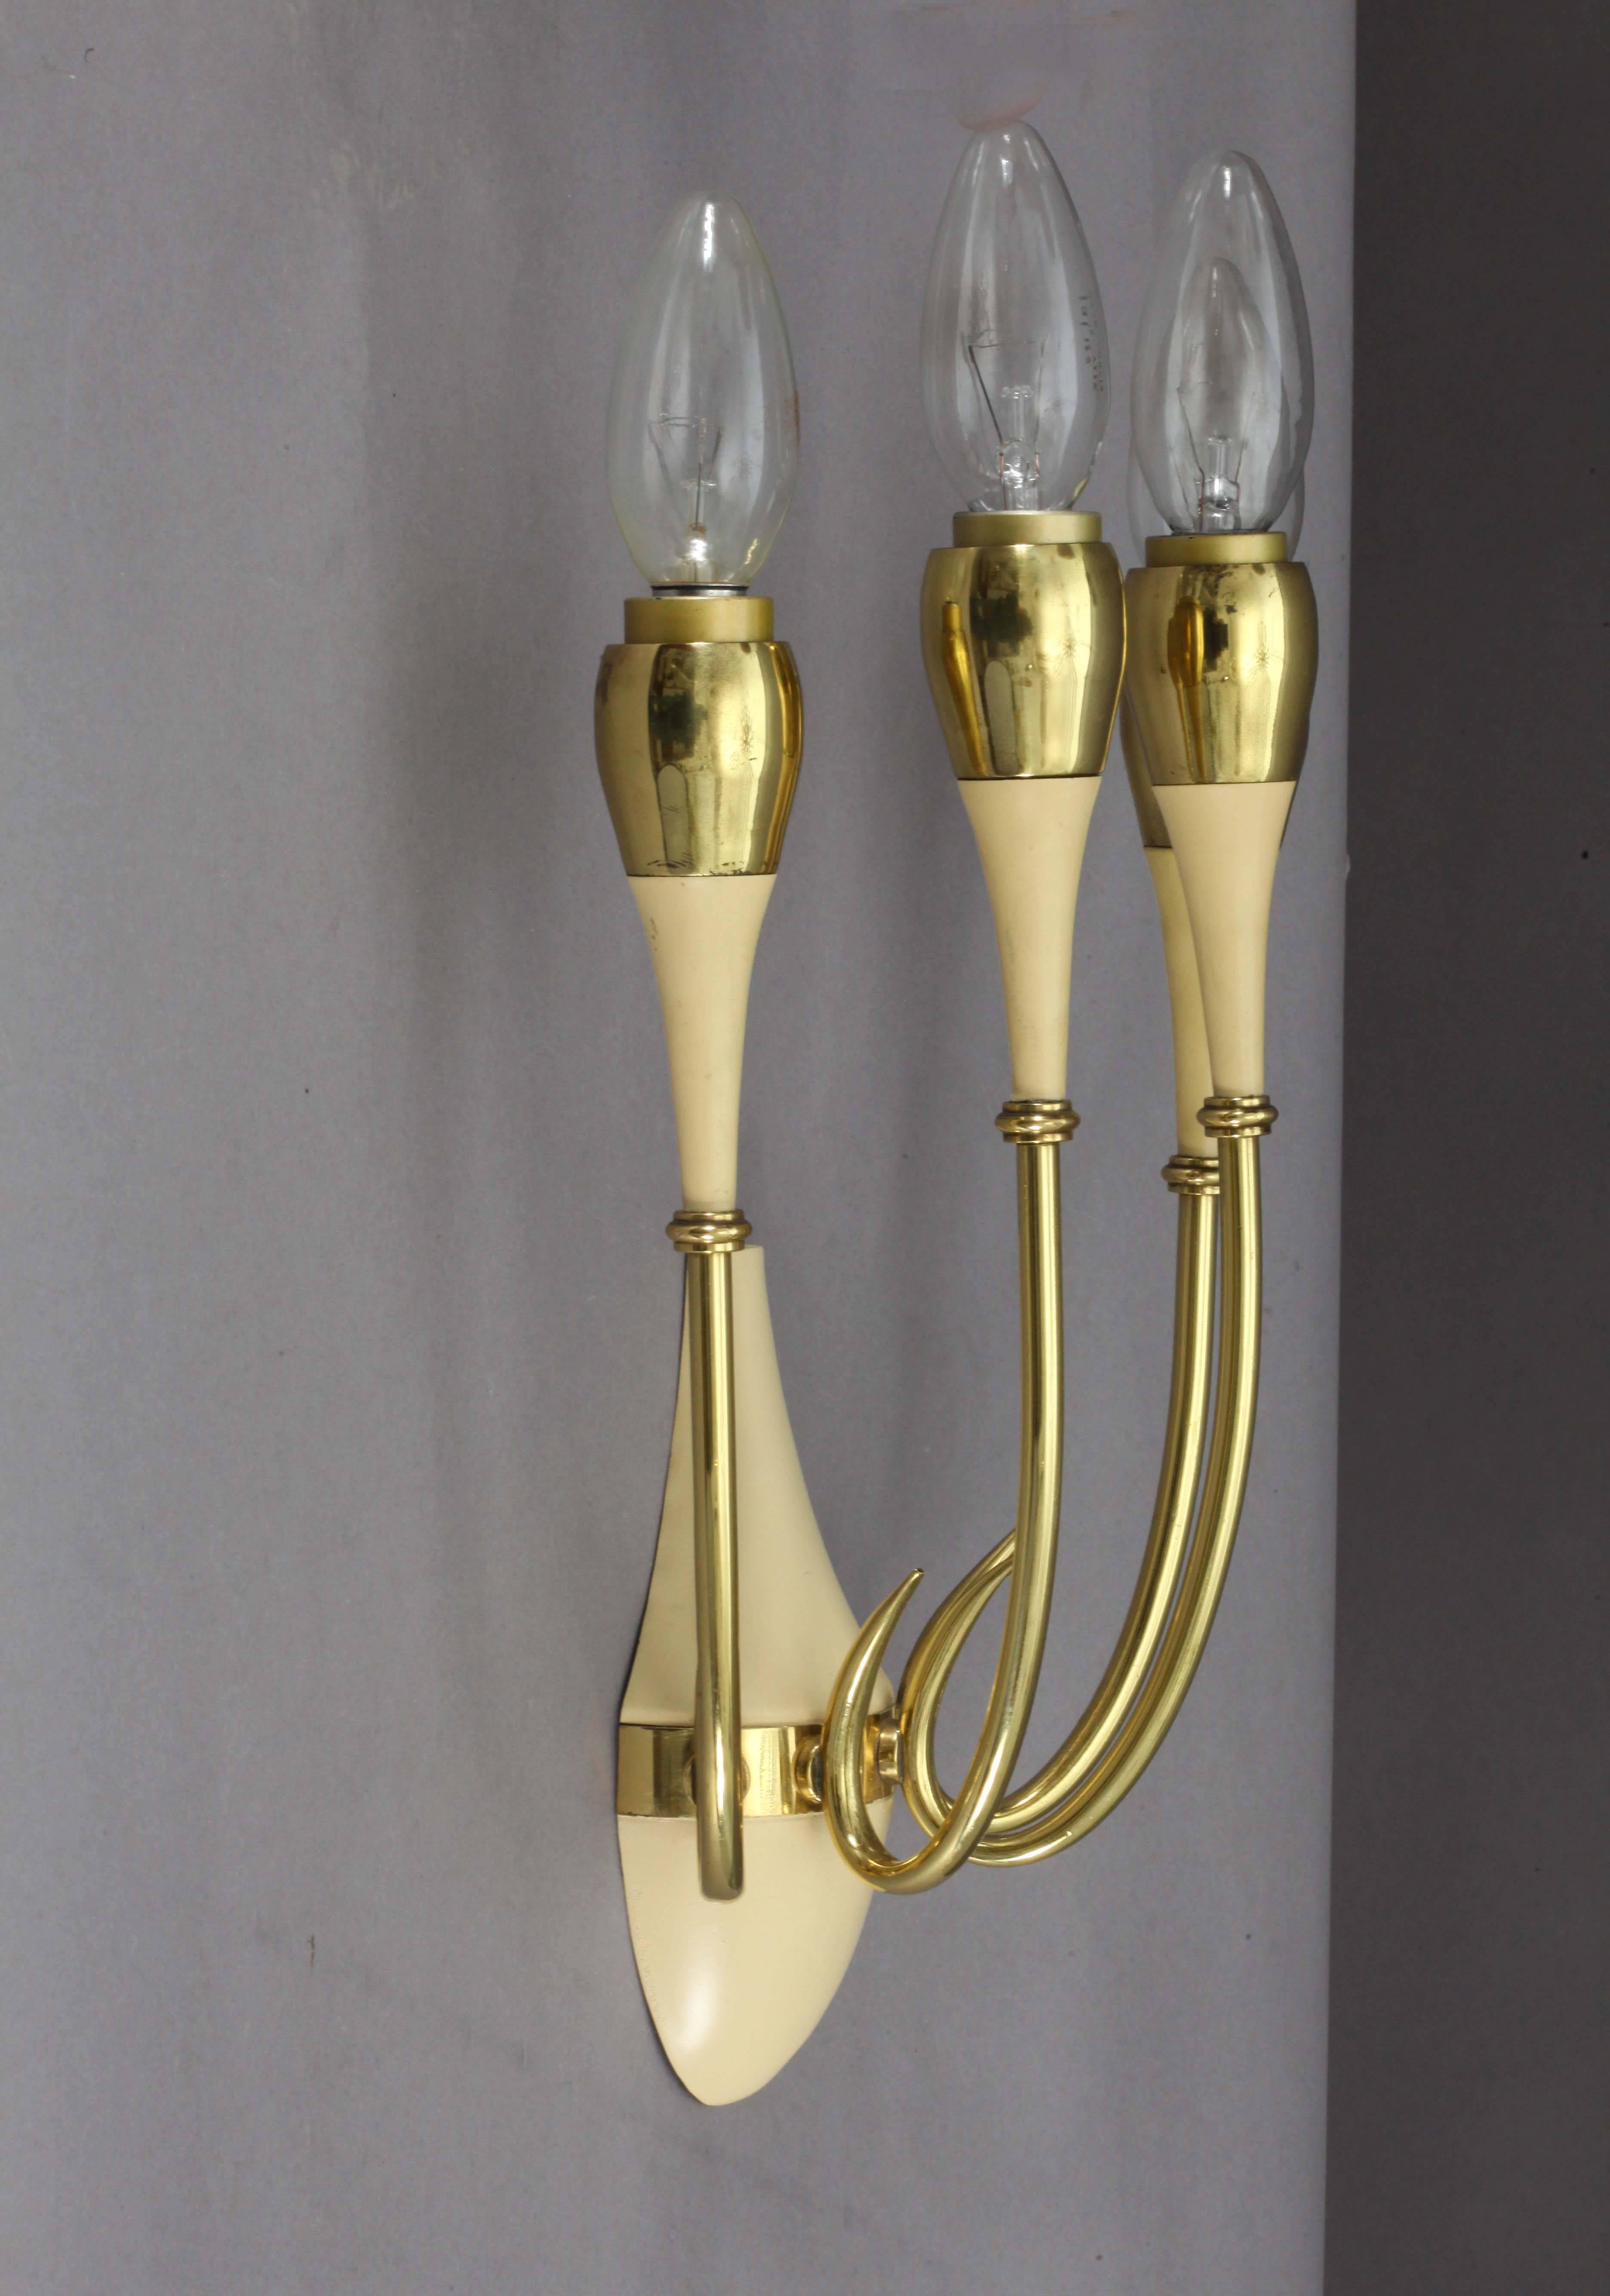 Italian Pair of Wall Sconces by Arredoluce, Italy, 1950 For Sale